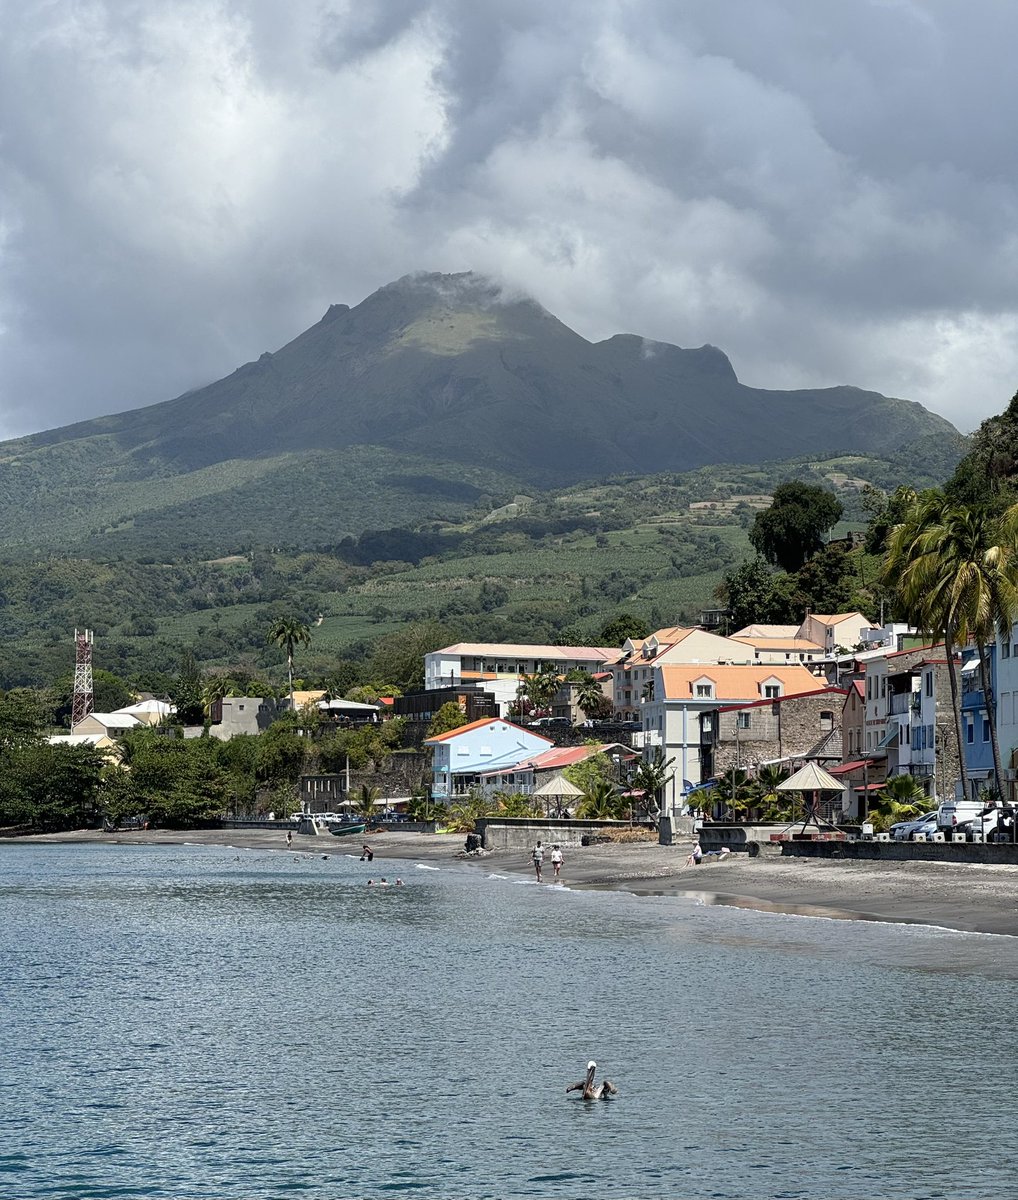 Mount Pelée, Martinique erupted in 1902 killing 28,000 people in St Pierre below. Only 2 survived. Apparently if you see the top you have to return. More than happy to. Fabulous place and lovely people but struggling with the creole!